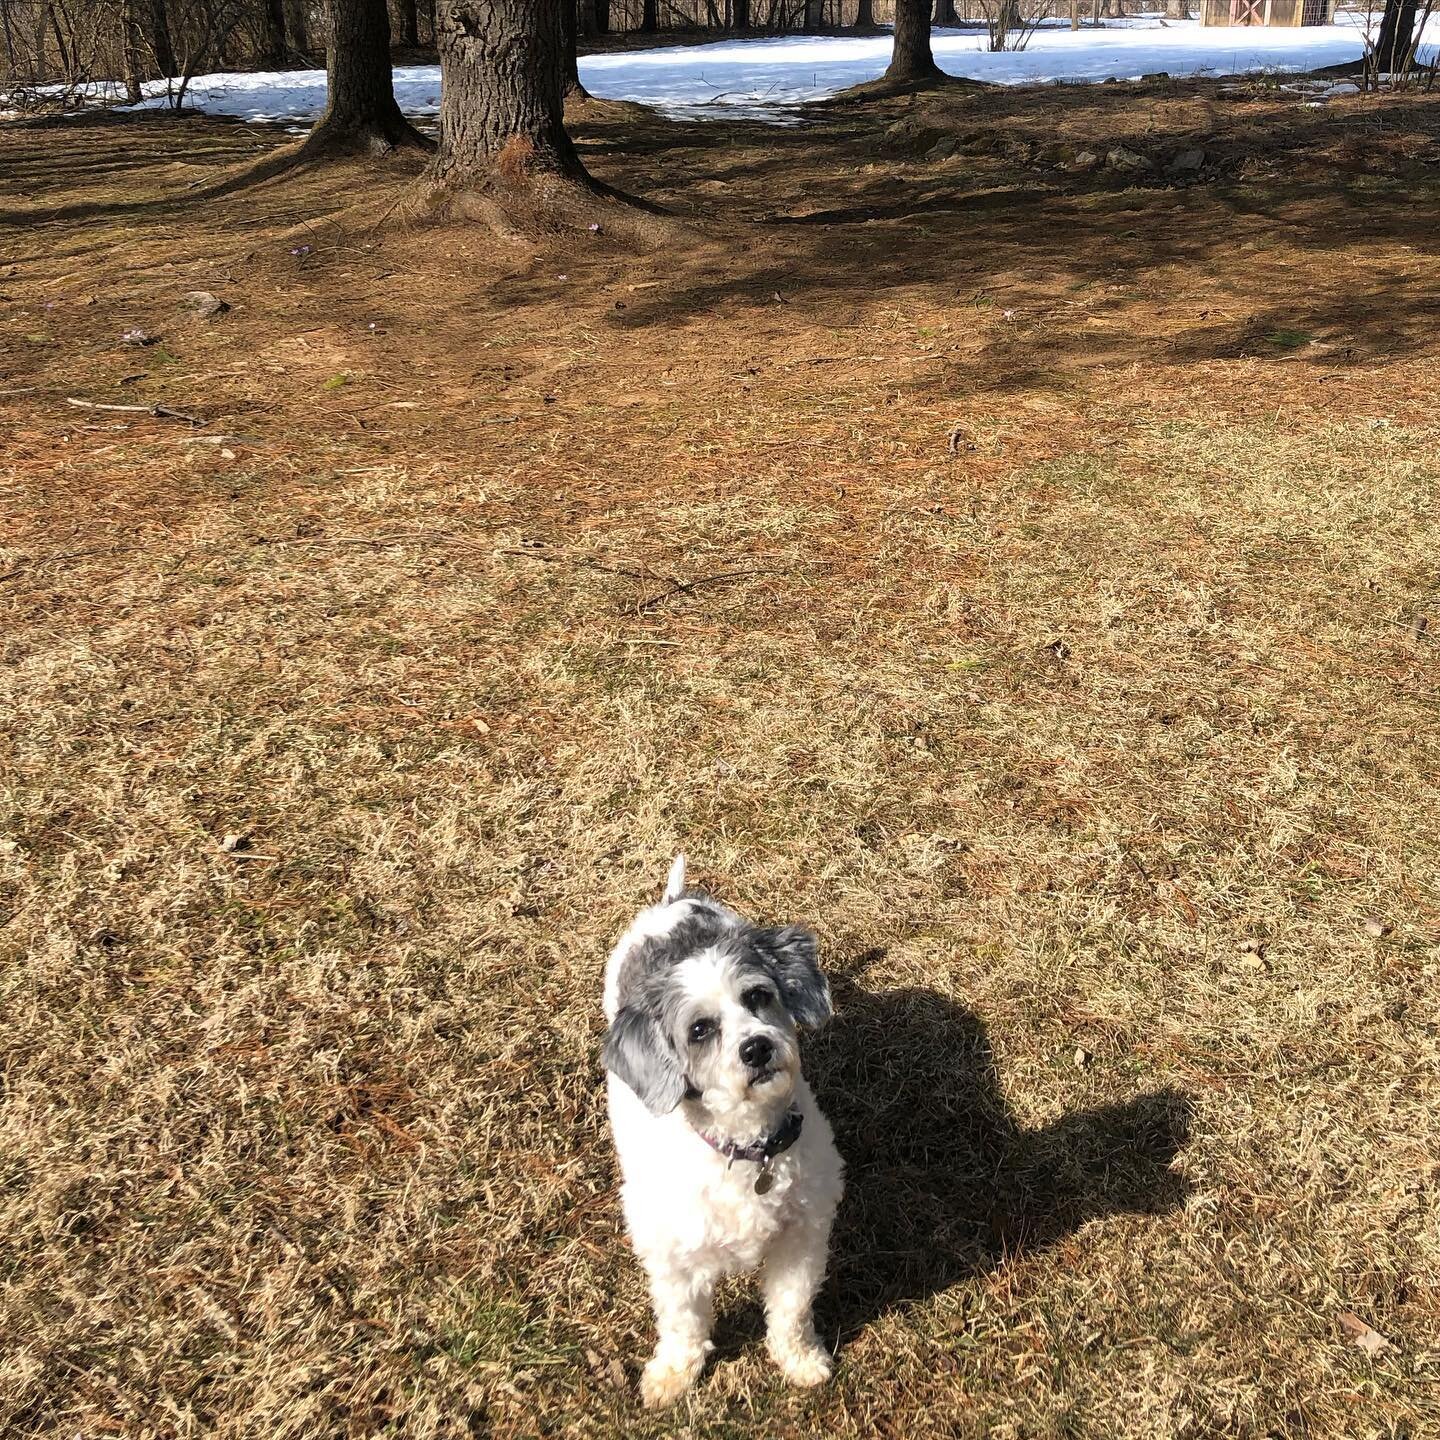 End of winter in NJ. Lucy was loving the (briefly) 60&deg; F day. As was I. (Except the multiple near wipe-outs I had on the muddy areas that seem to have multiplied over the winter...) 

Scroll through for crocuses in the foreground by the tree, and